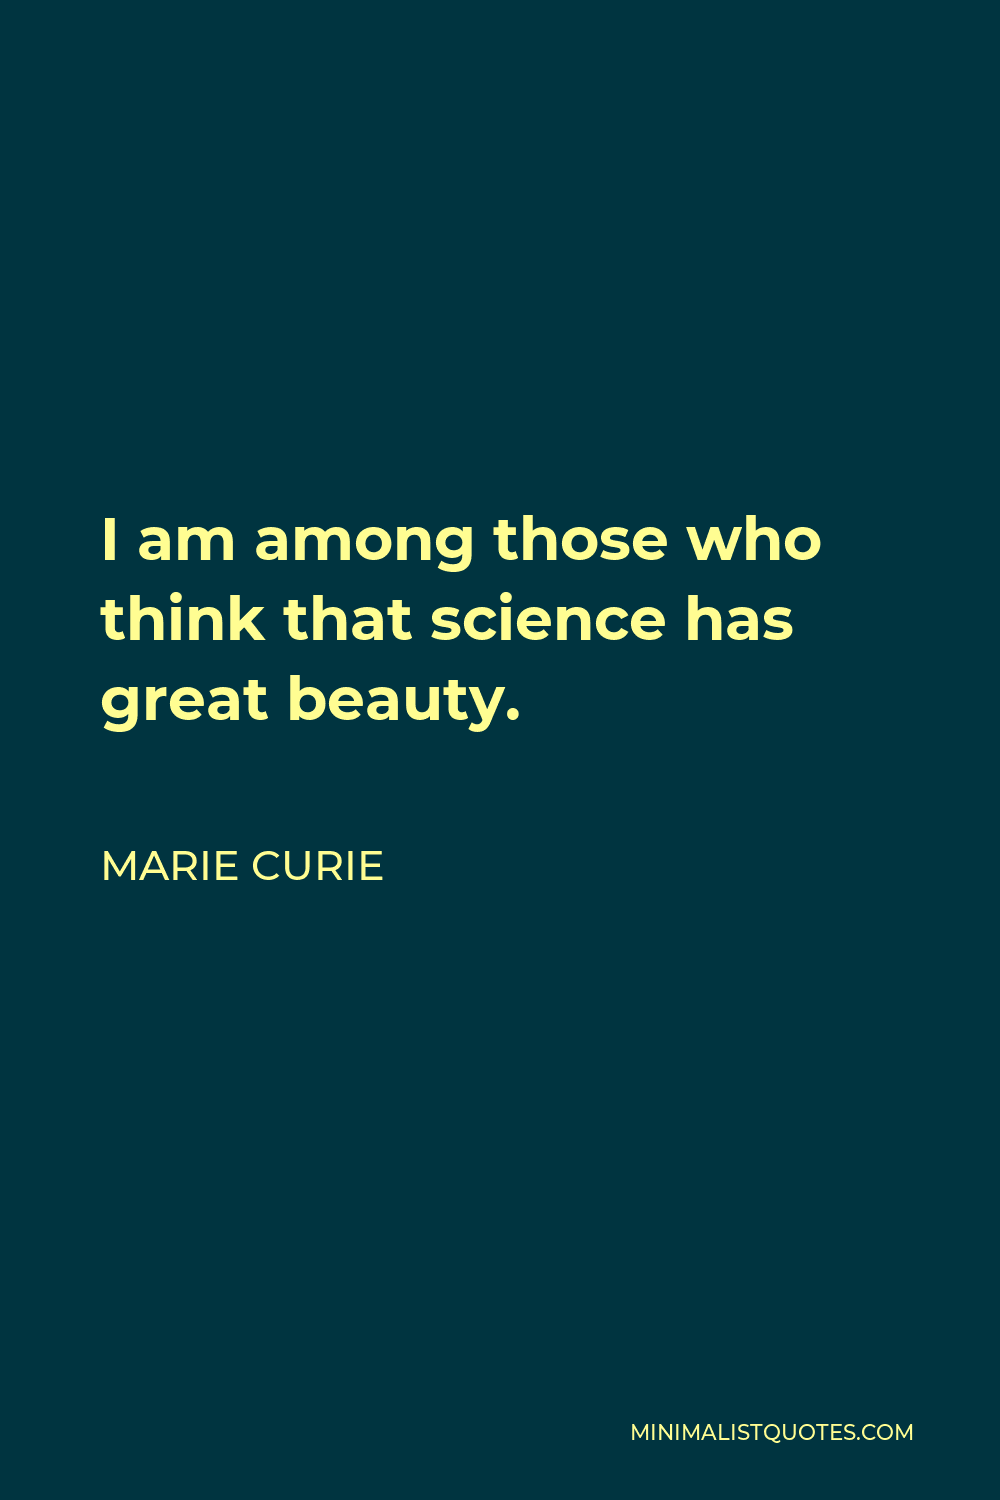 Marie Curie Quote - I am among those who think that science has great beauty.